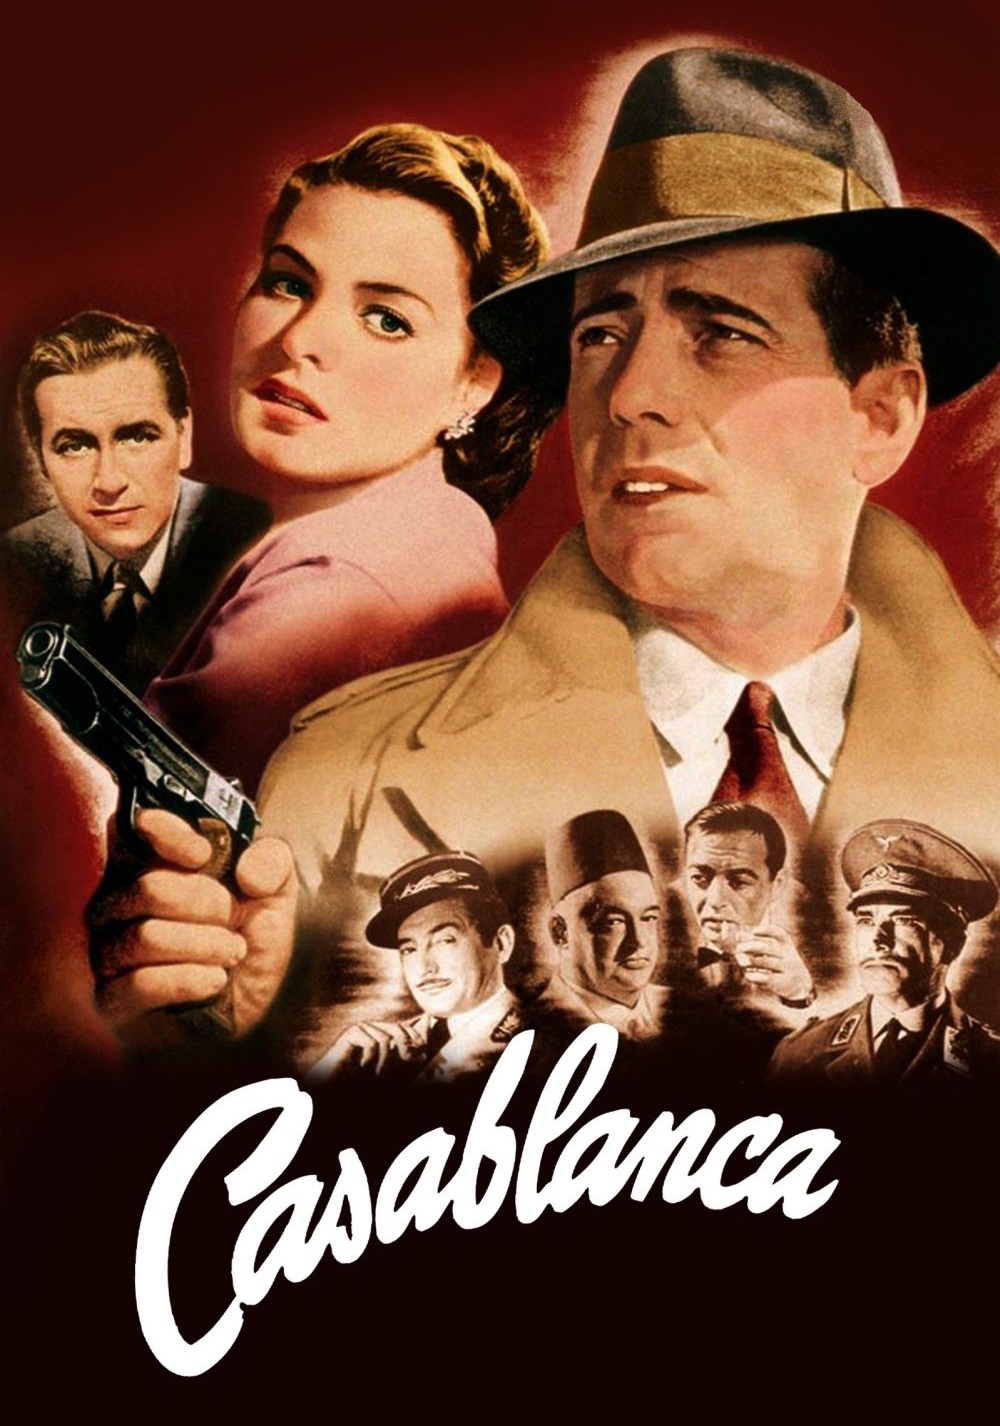 Casablanca Movie Poster - ID: 79960 - Image Abyss.